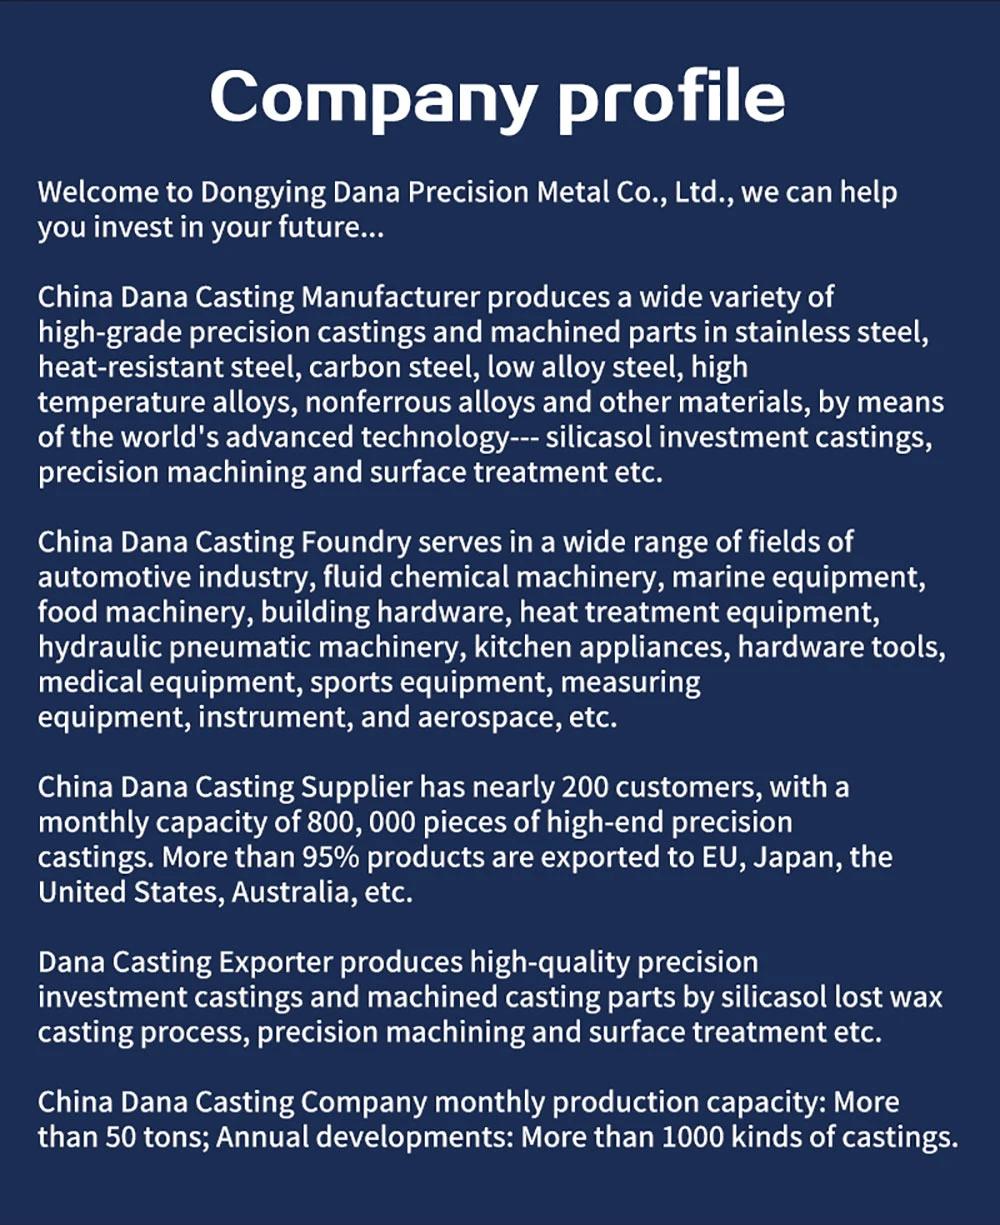 Stainless Steel Investment Casting Stainless Steel Lost Wax Casting Made in Stainless Steel Foundry